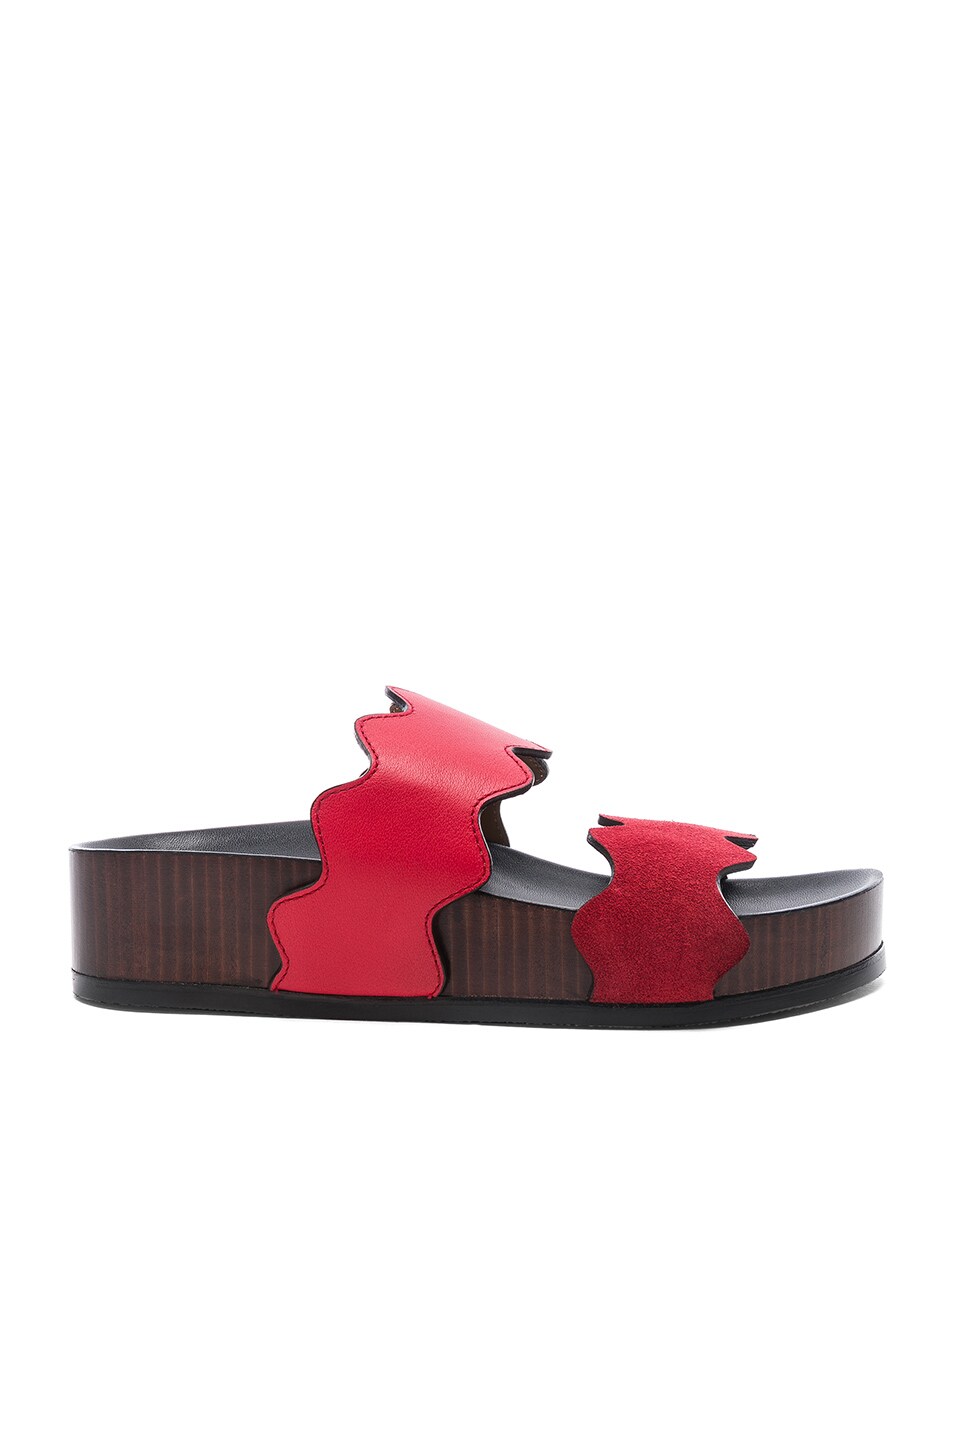 Image 1 of Chloe Leather & Suede Lauren Slides in Gypsy Red